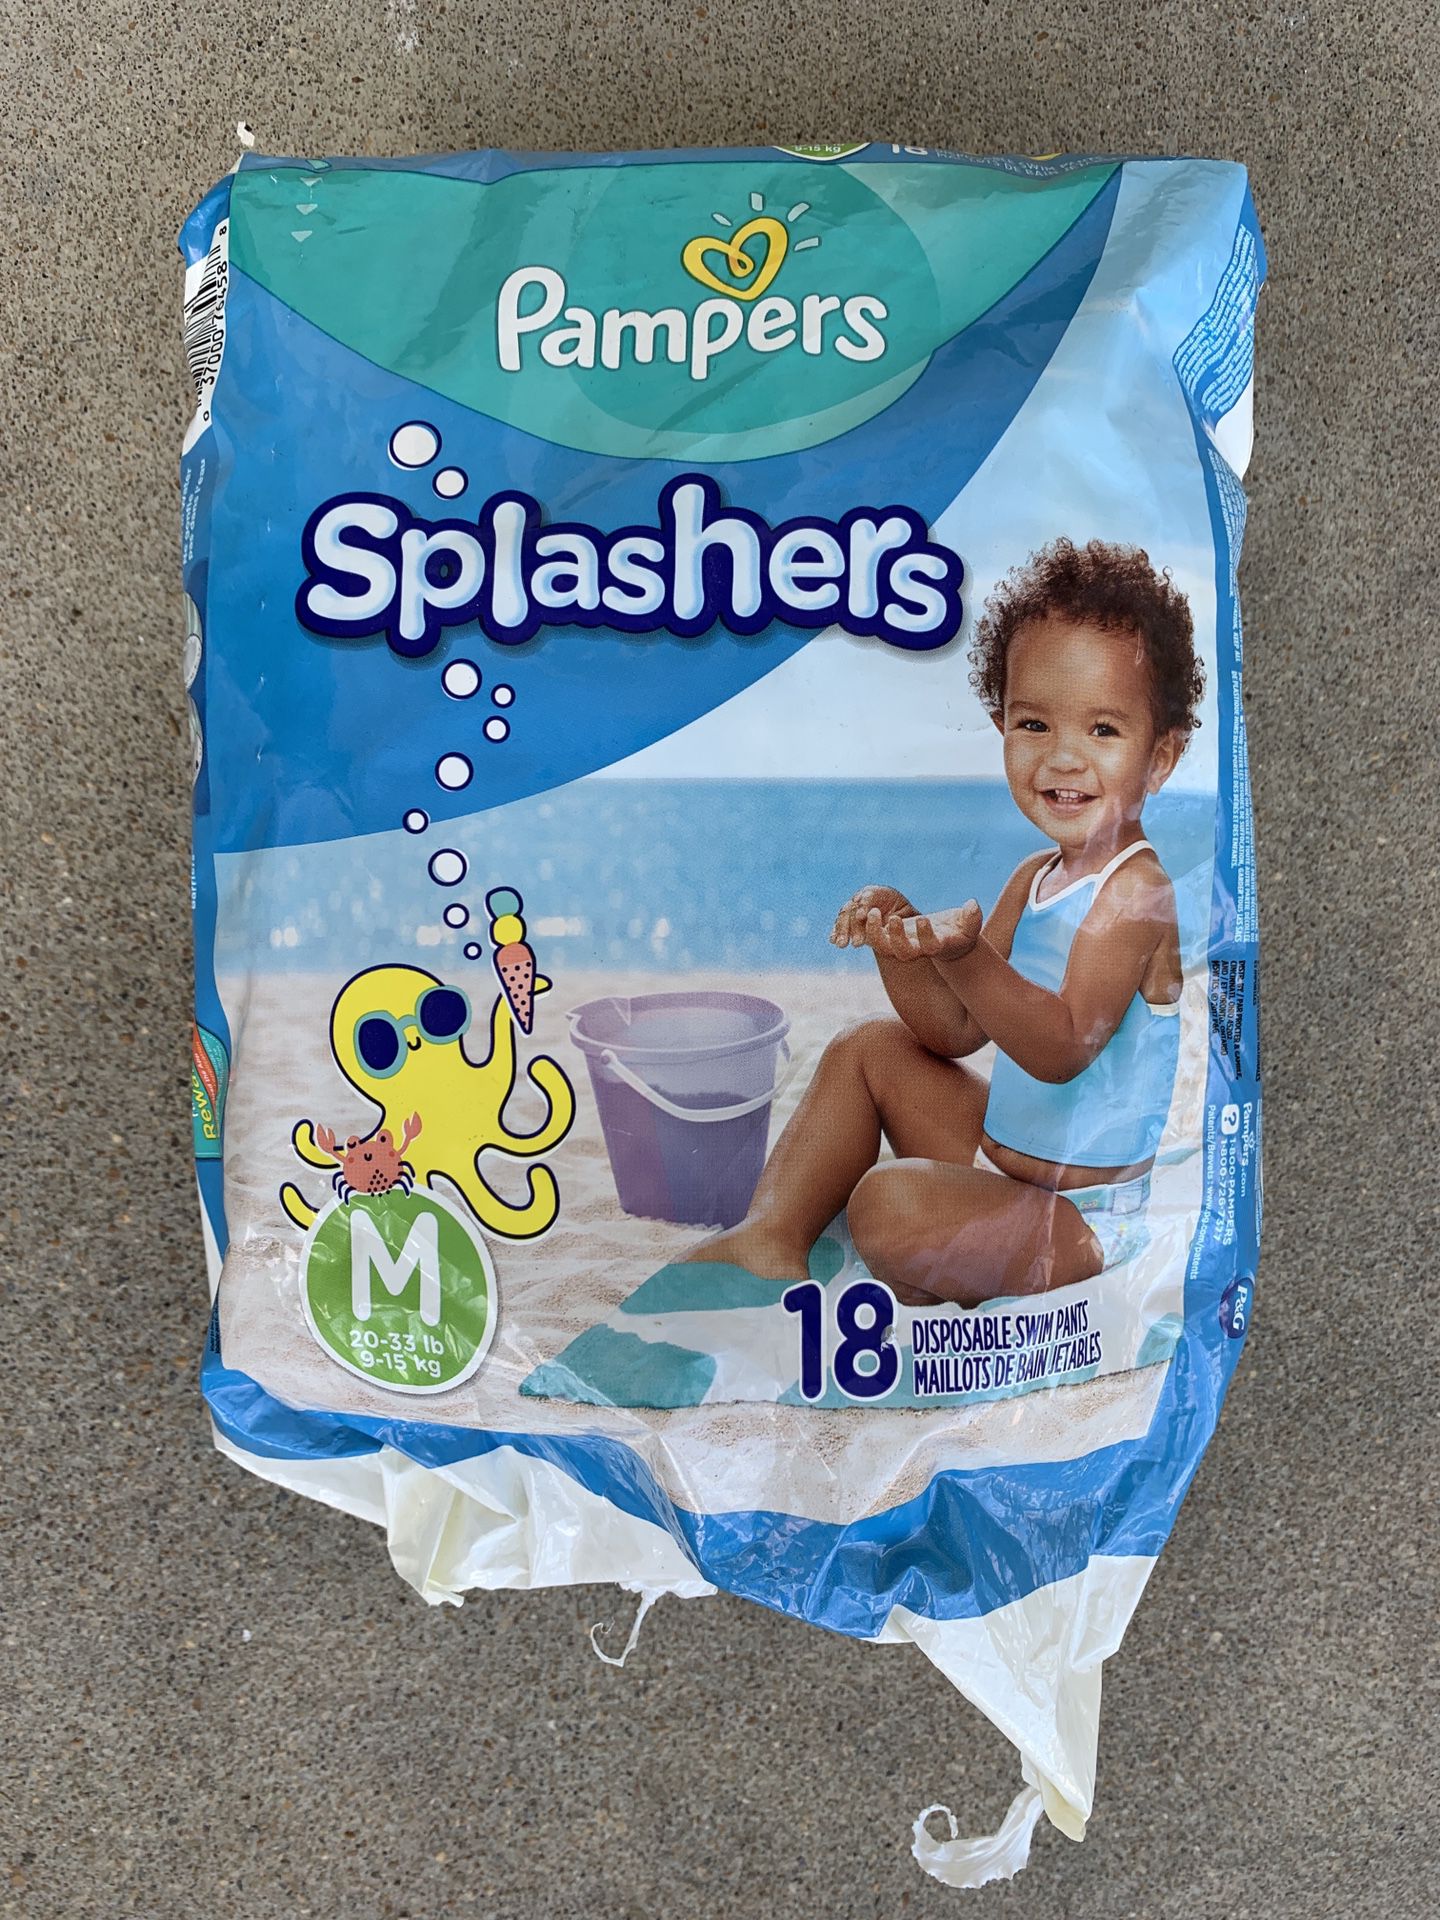 Pampers slashers M 20-33lbs